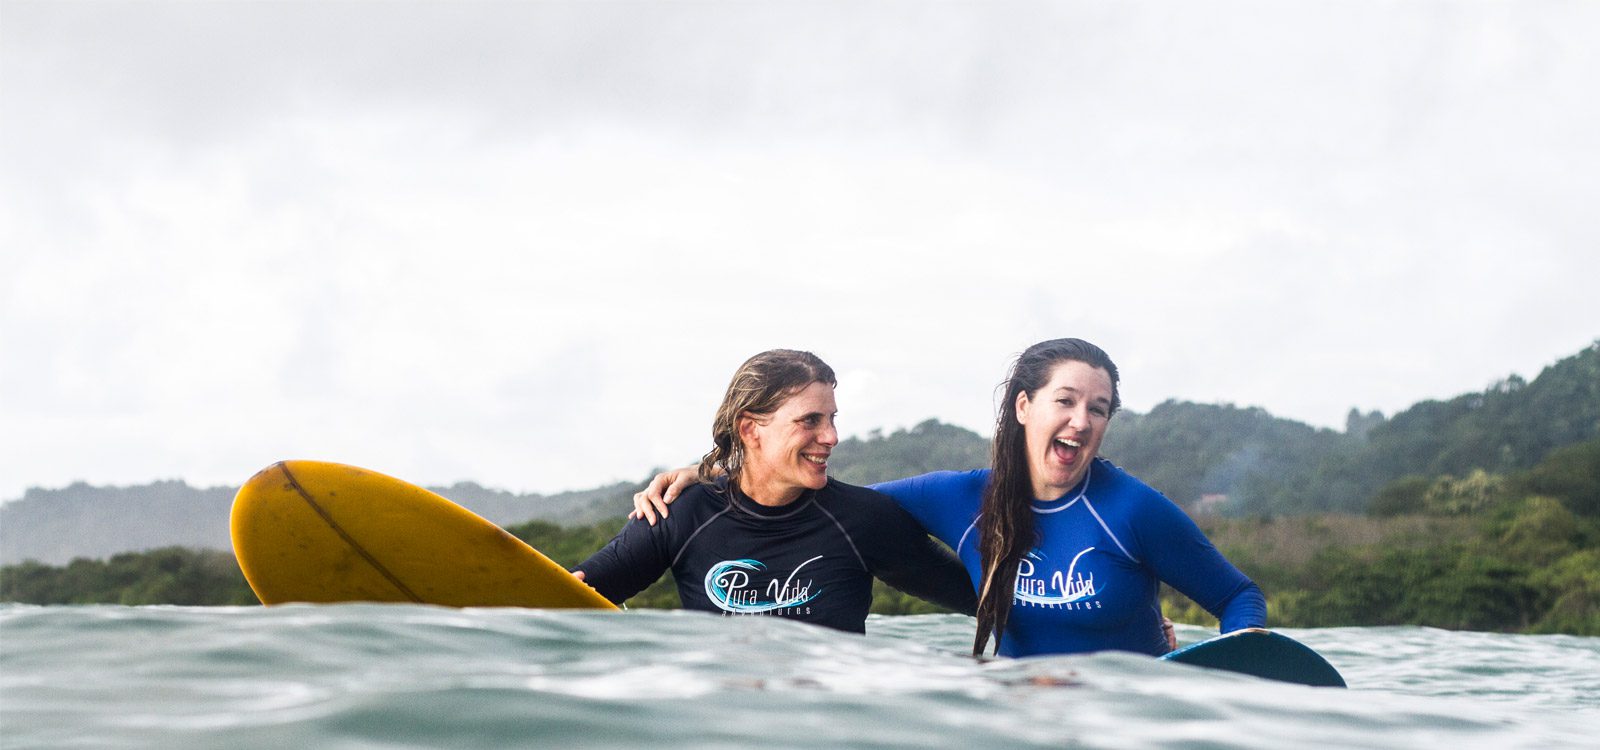 Women Surfing in Surf and Yoga Retreat Costa Rica